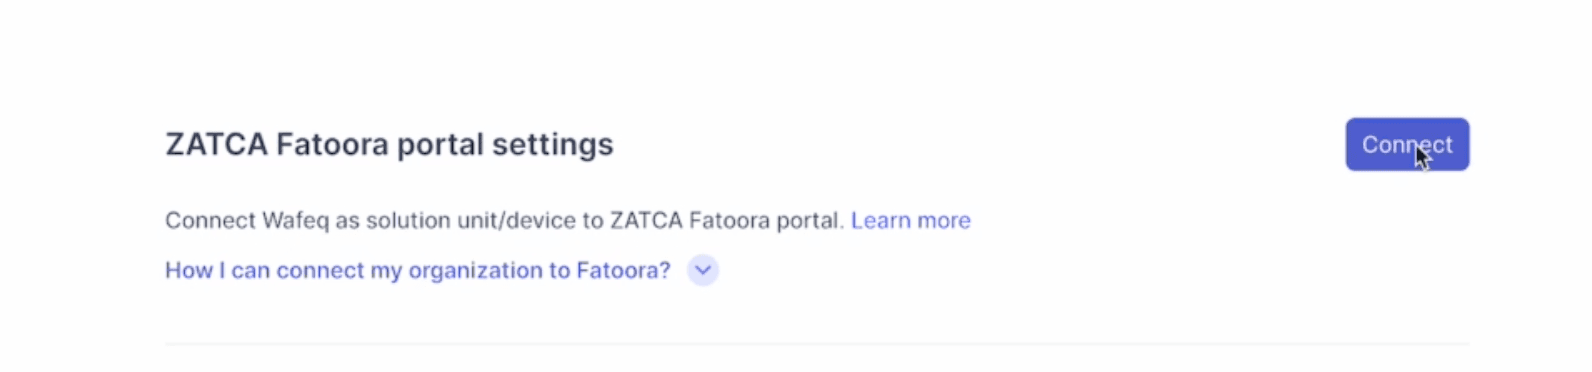 connect to Fatoora